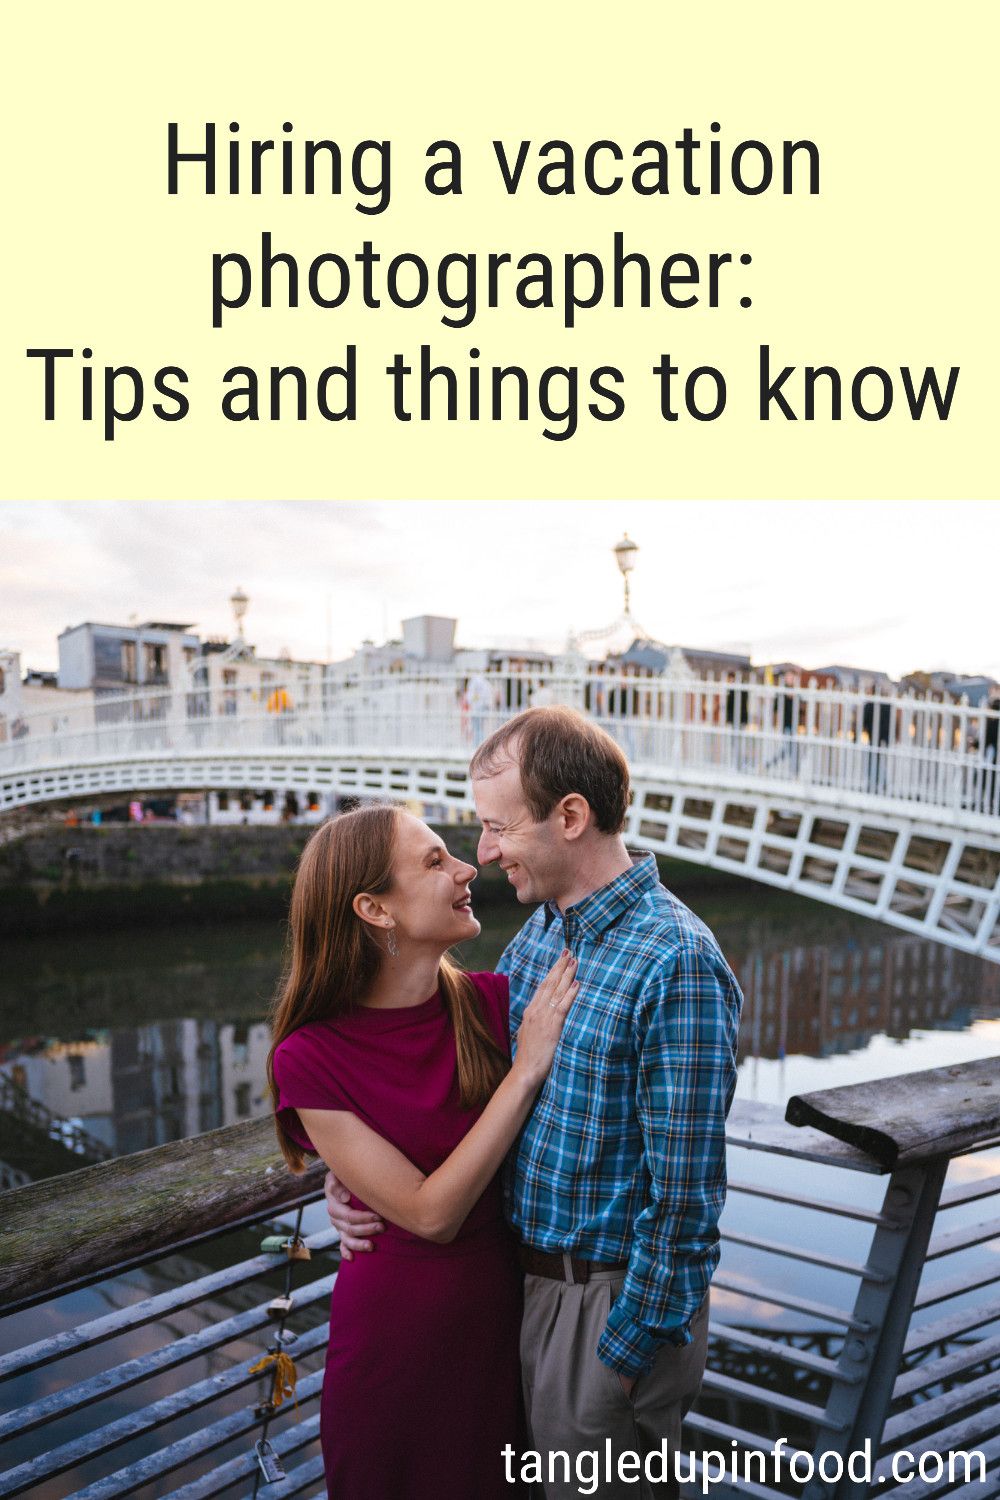 Photo of Stacy and Mike in front of Dublin's Ha'Penny Bridge and text reading "Hiring a vacation photographer: Tips and things to know"